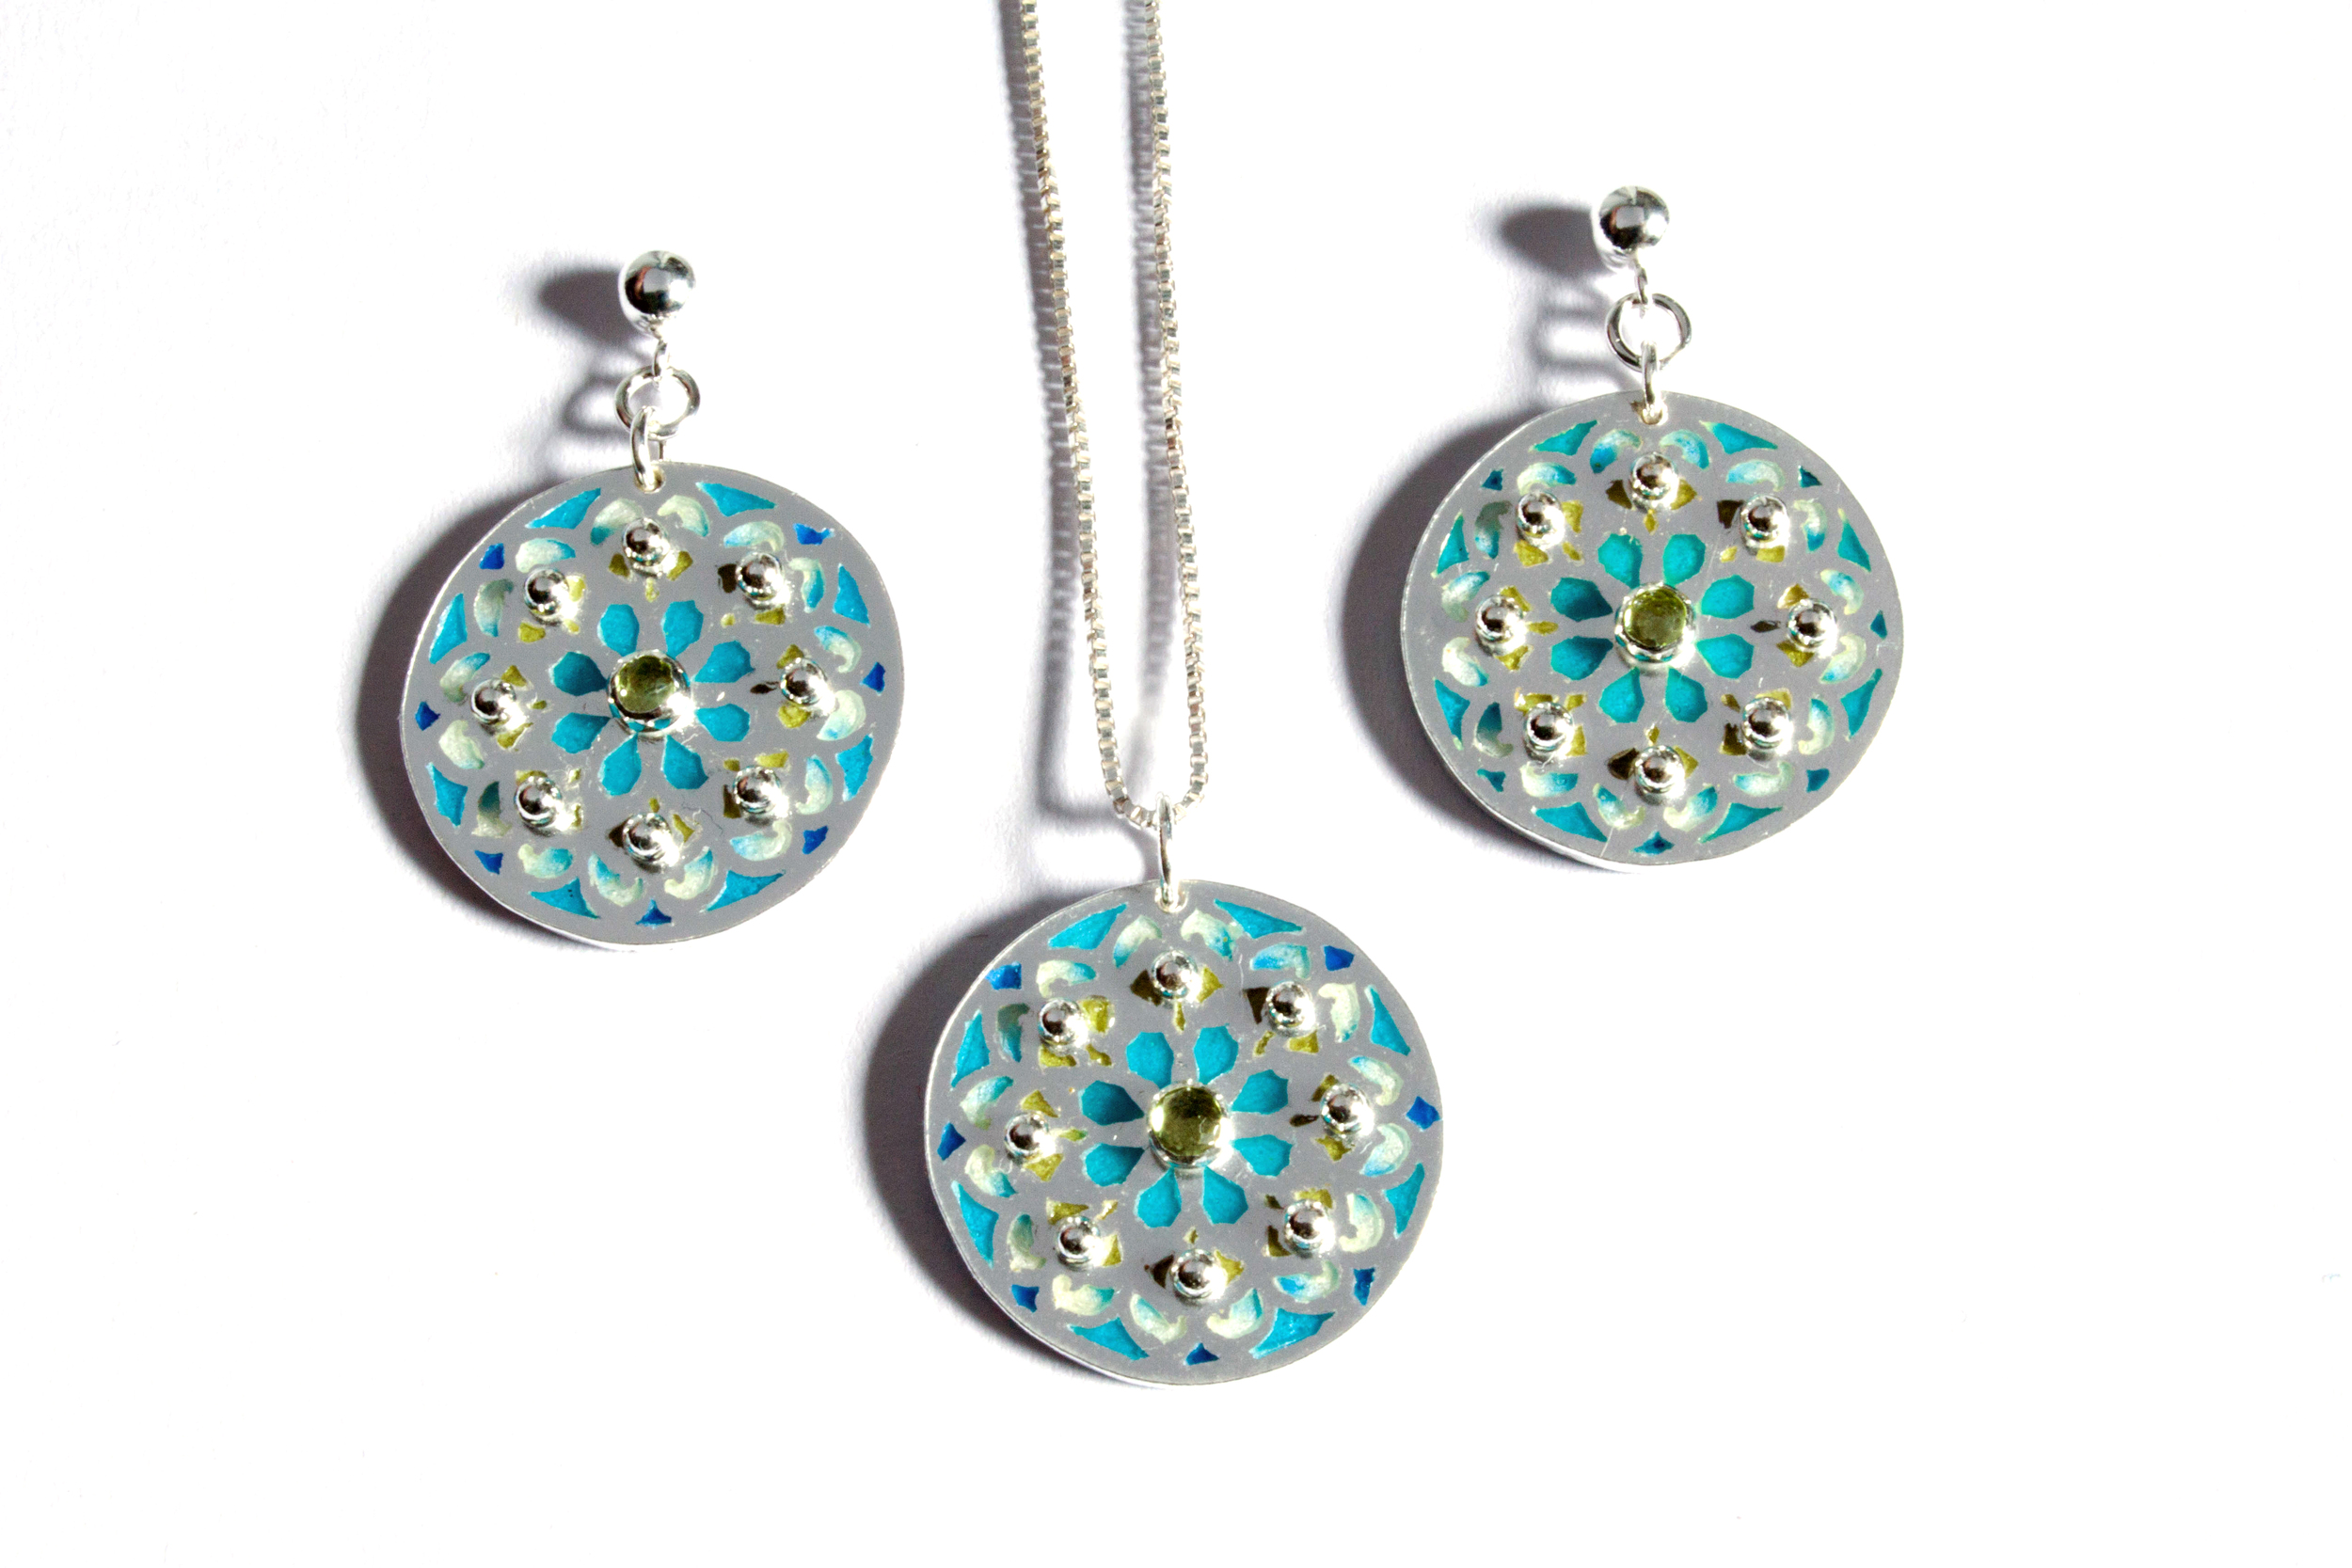 Blooming Peridot Gemstone and Enamel Earrings and Necklace